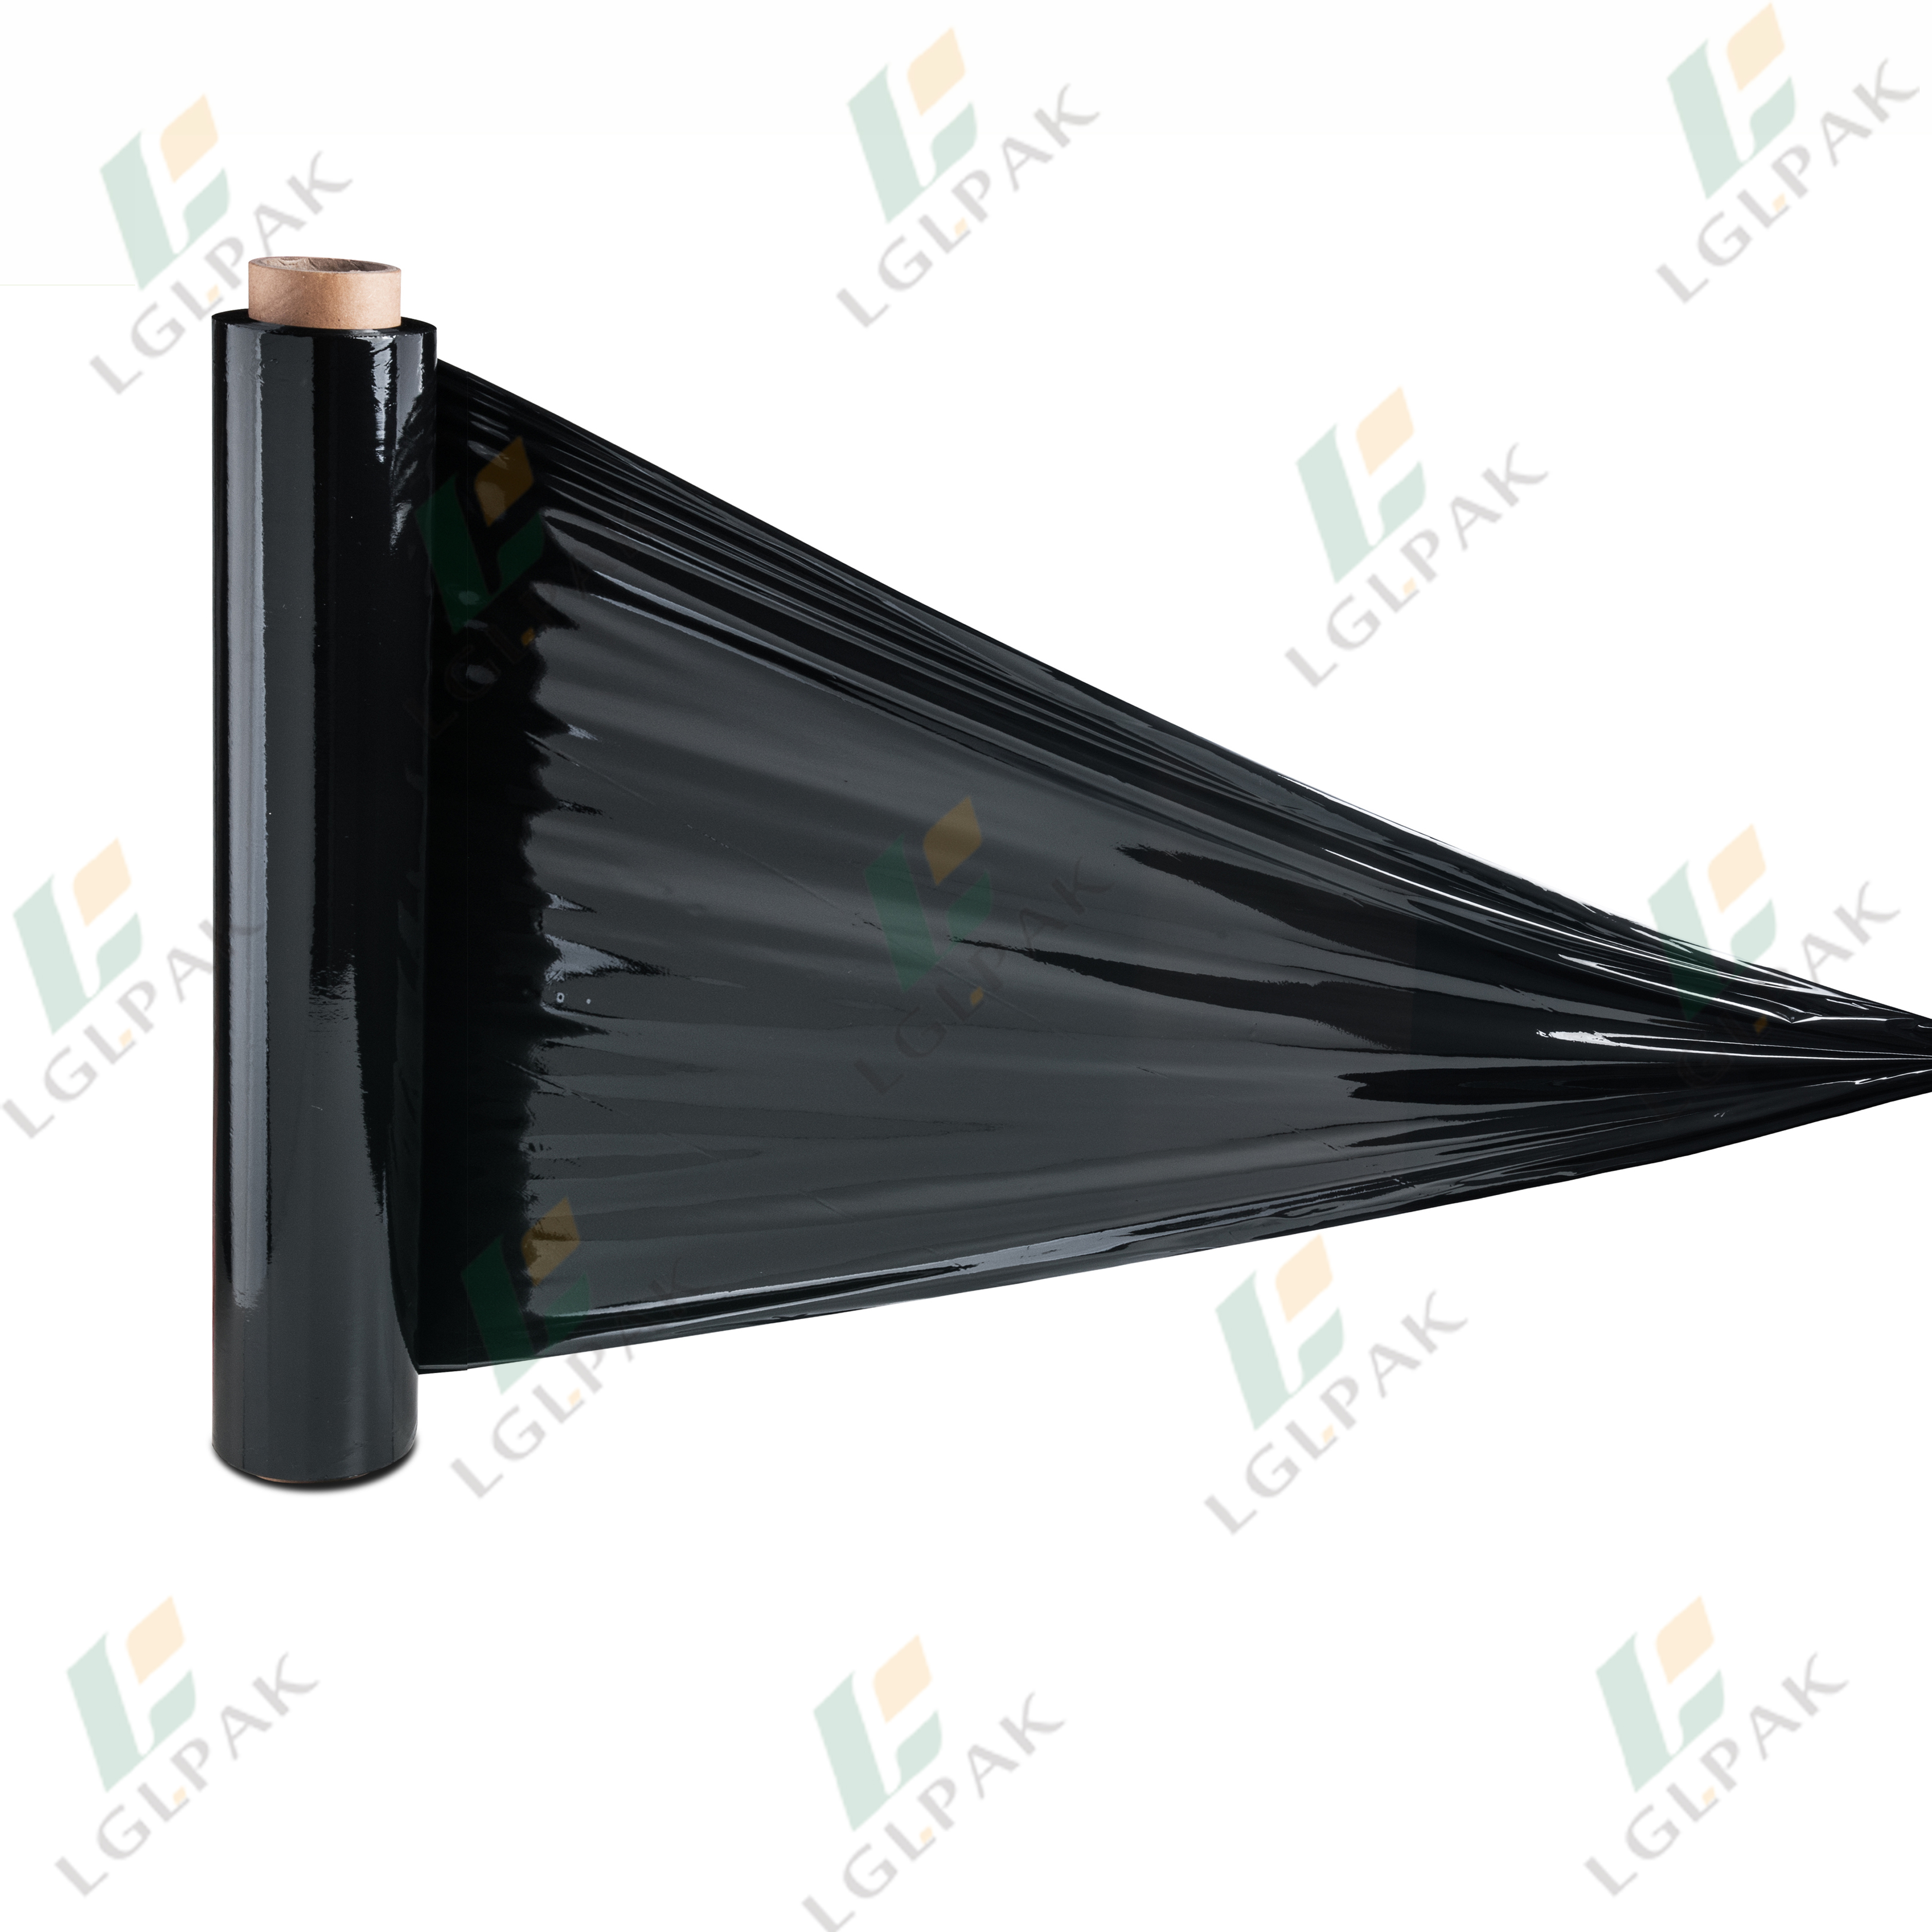 Black stretch film foil at white background isolated